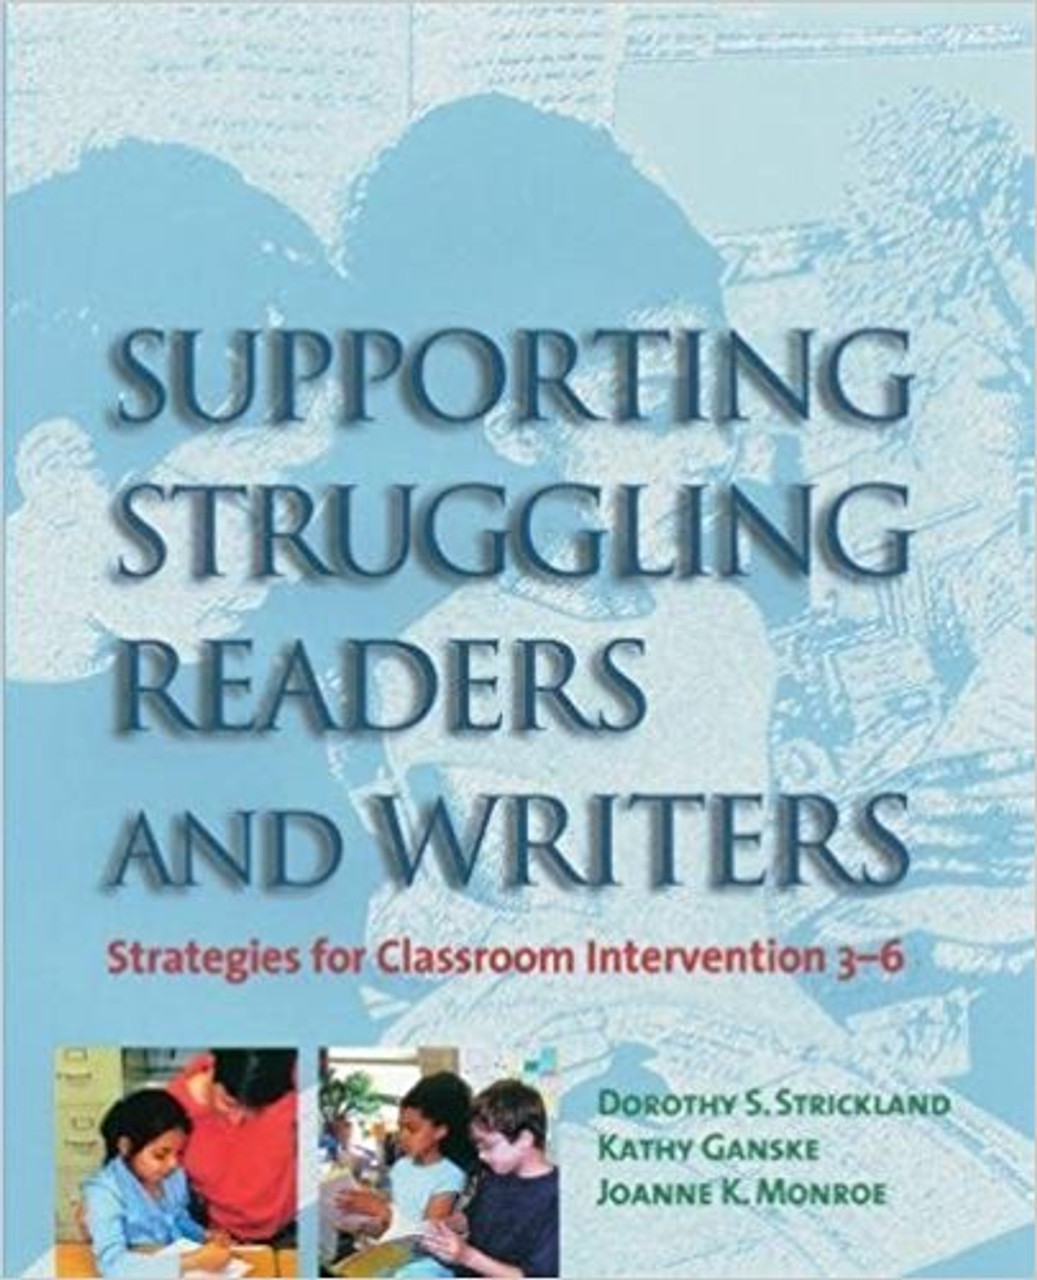 Supporting Struggling Readers and Writers: Strategies for Classroom Intervention 3-6 by Dorothy S Strickland